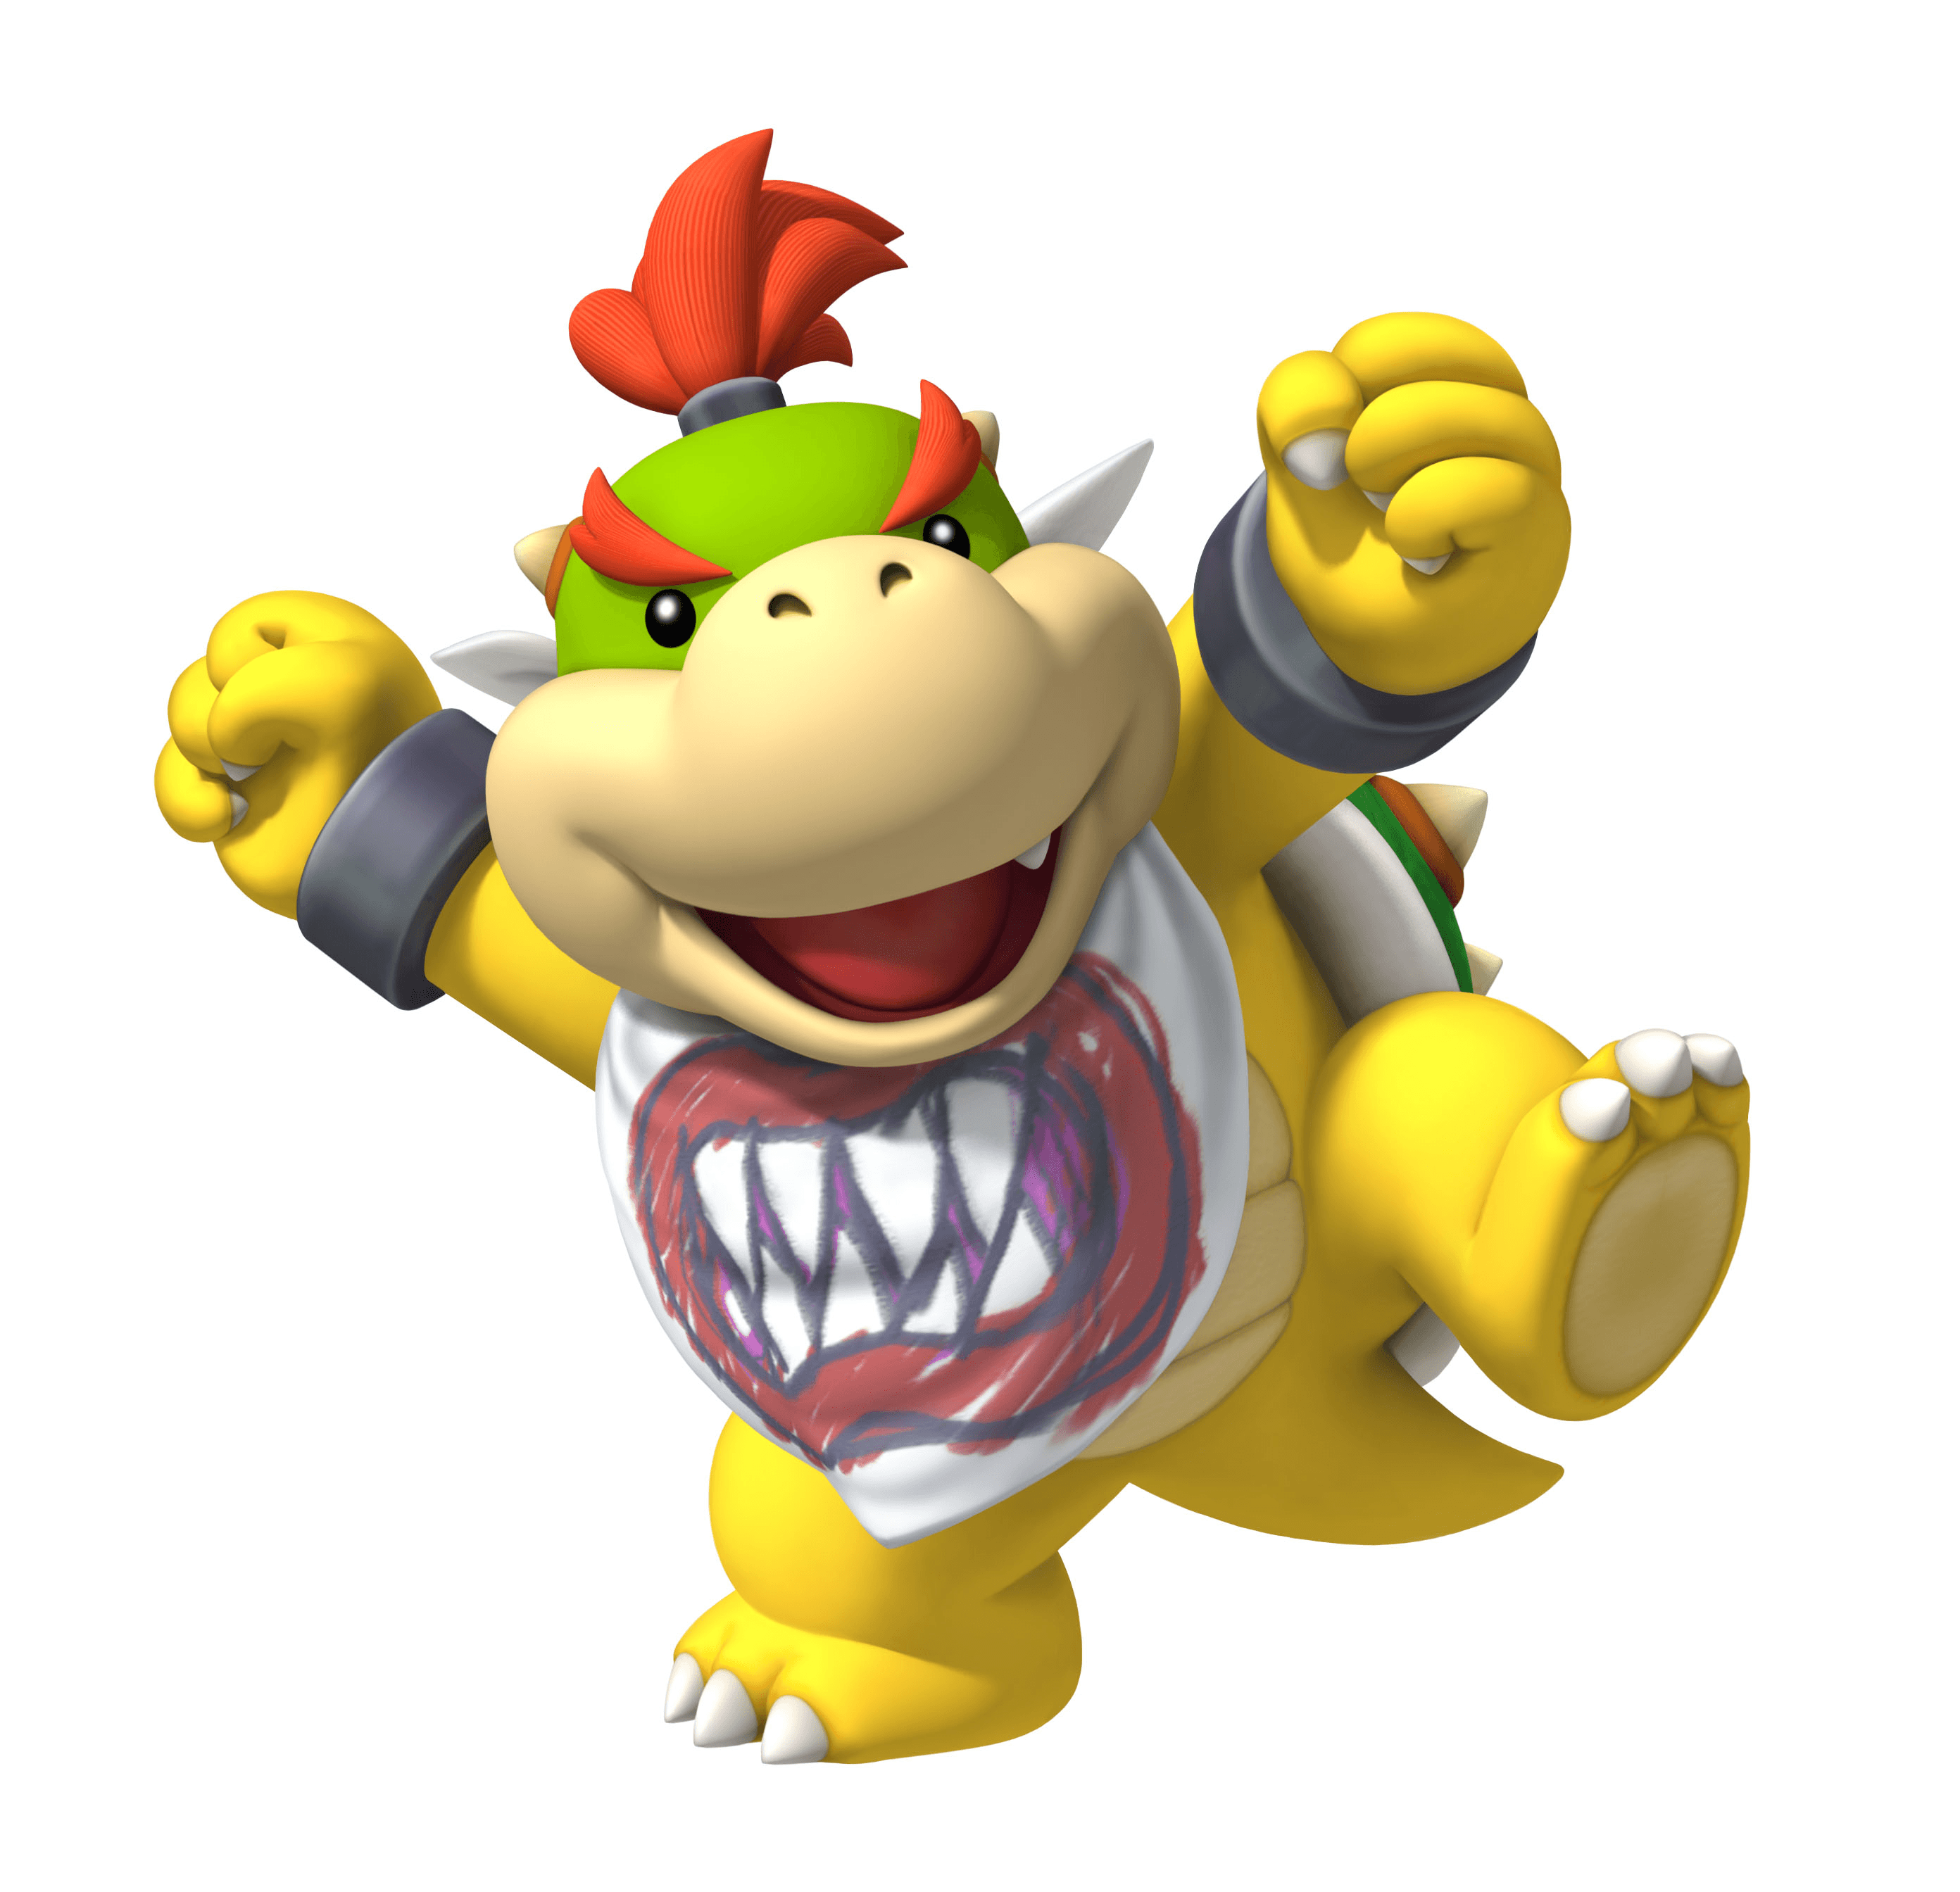 Bowser Jr. screenshots, image and picture